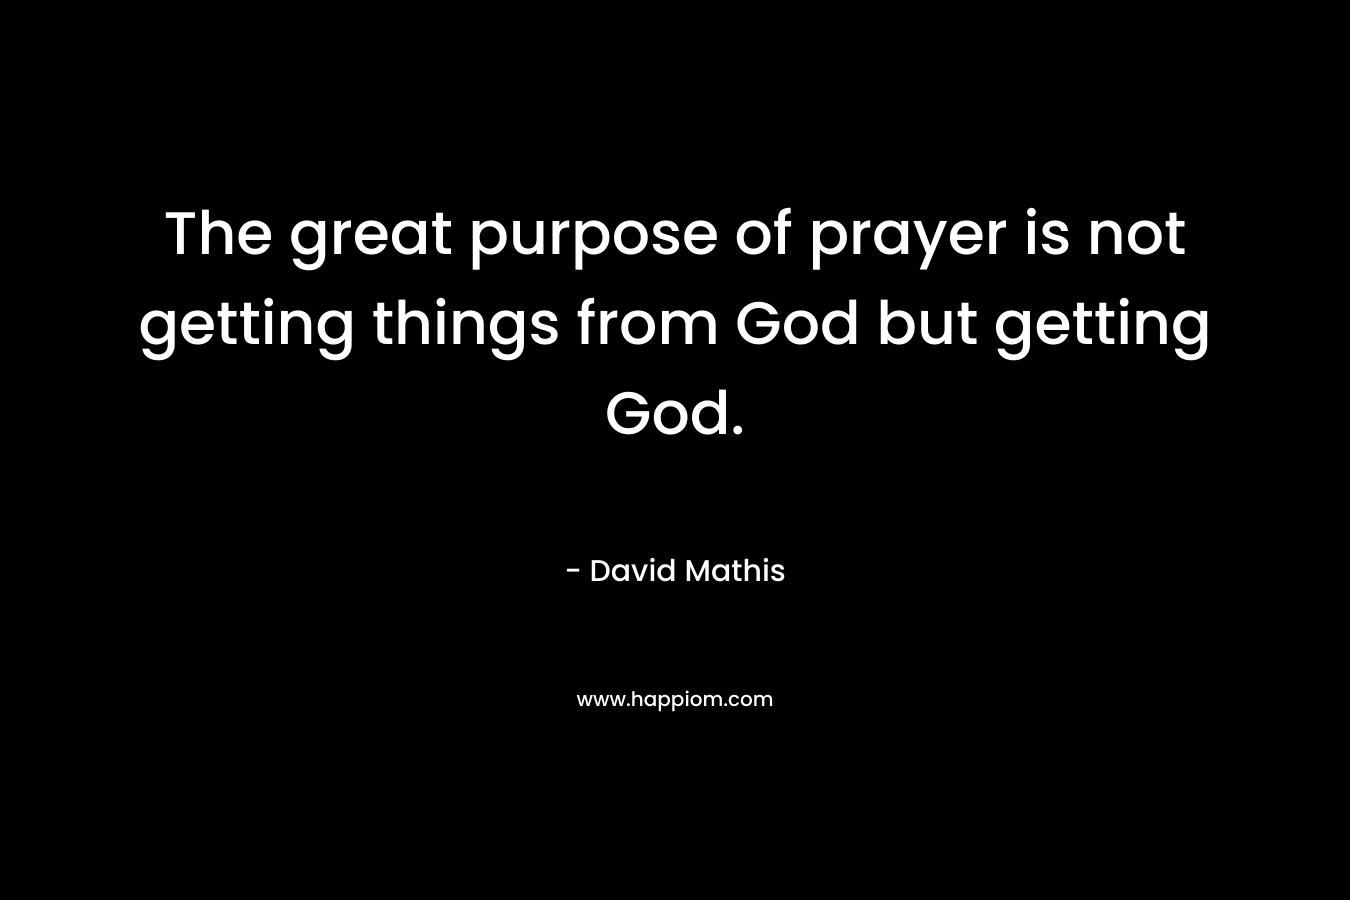 The great purpose of prayer is not getting things from God but getting God.